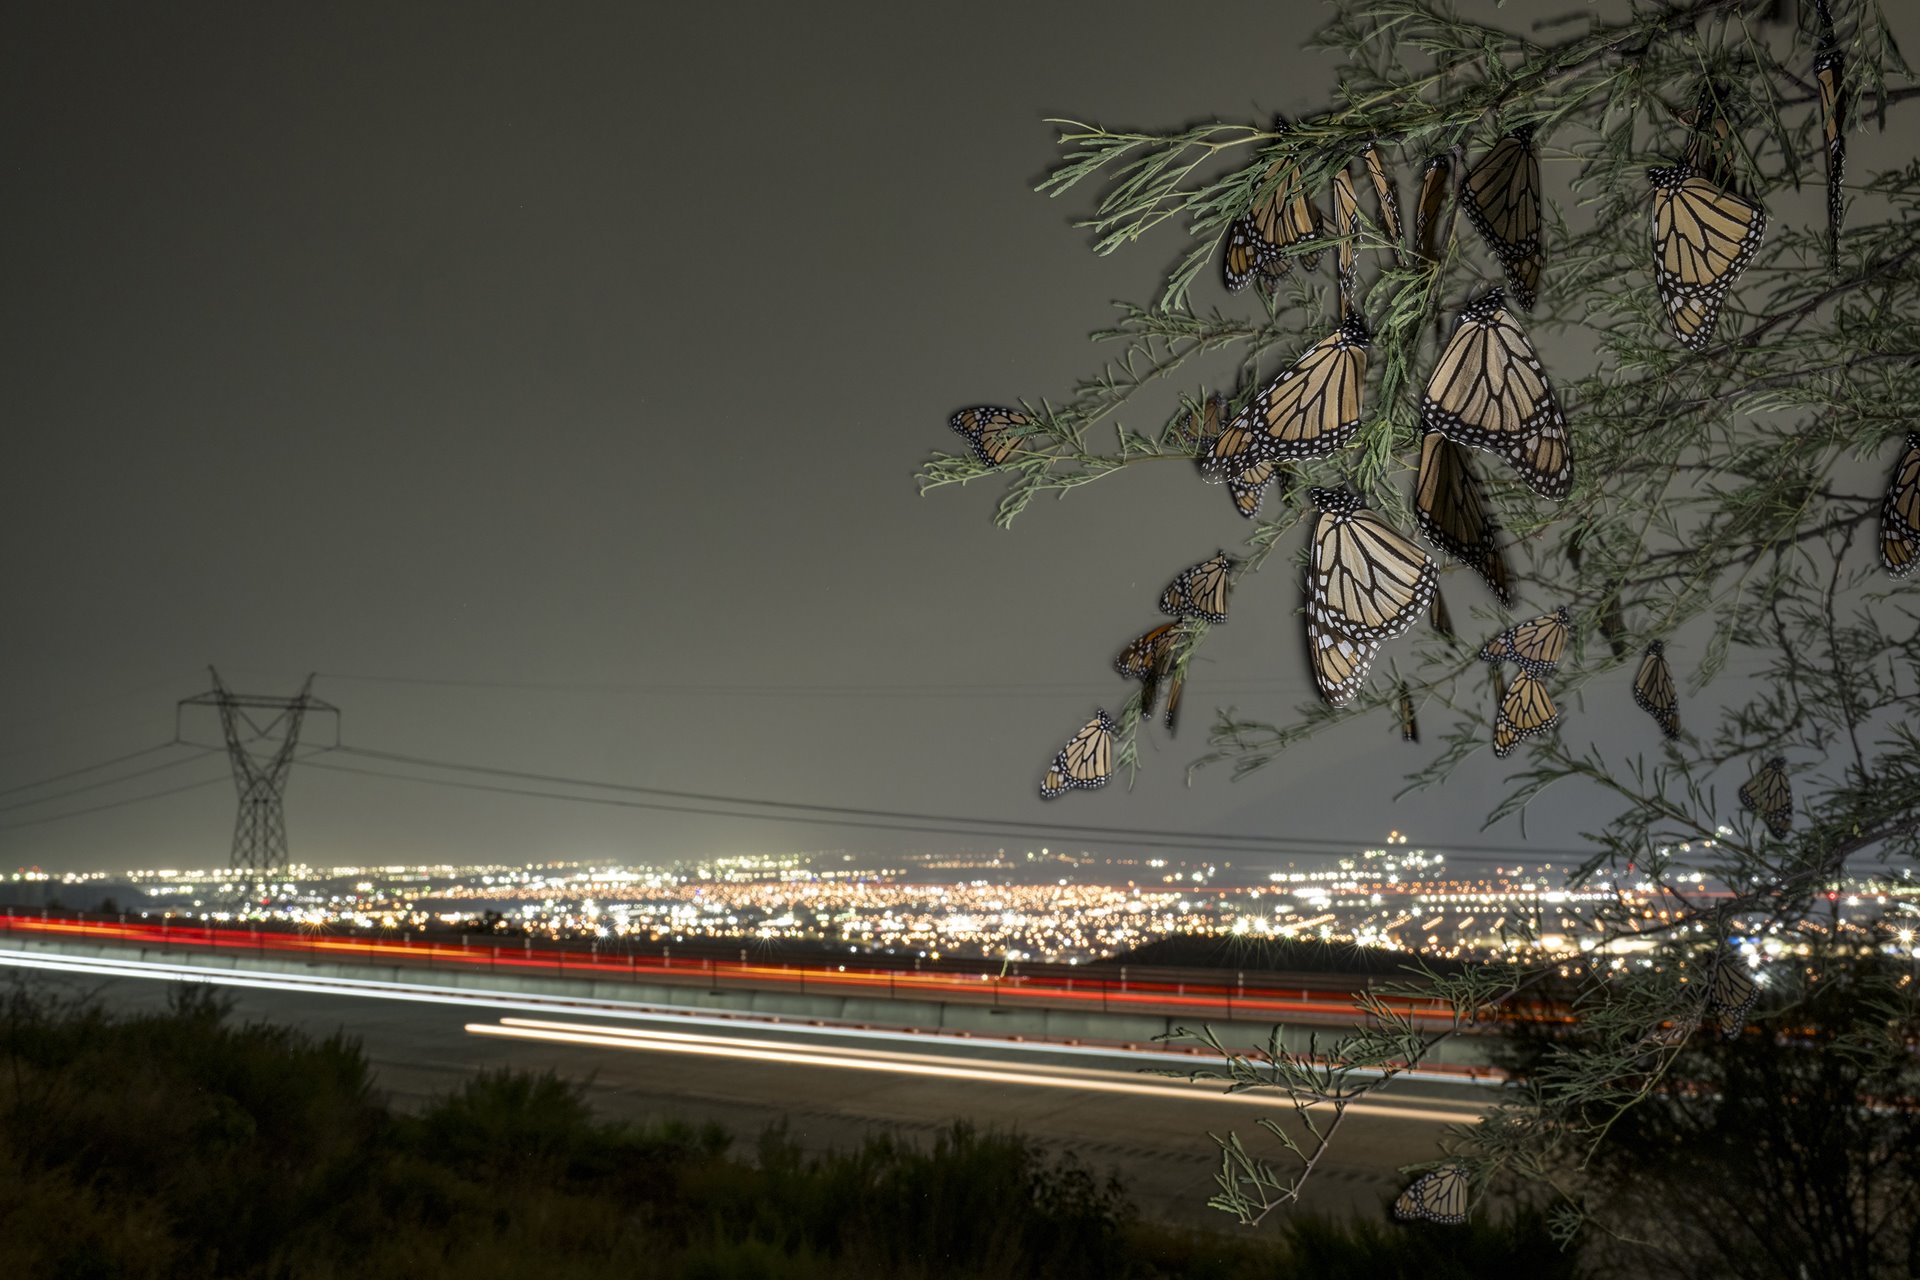 Monarch butterflies perch on trees near a major highway in Monterrey, Nuevo León, Mexico. In busy areas, roadkill can account for an estimated 2.5&ndash;3% of monarch deaths annually, during the fall migration. In addition, light pollution from cities can cause confusion between night and day, disrupting patterns of when to fly and when to rest.&nbsp;